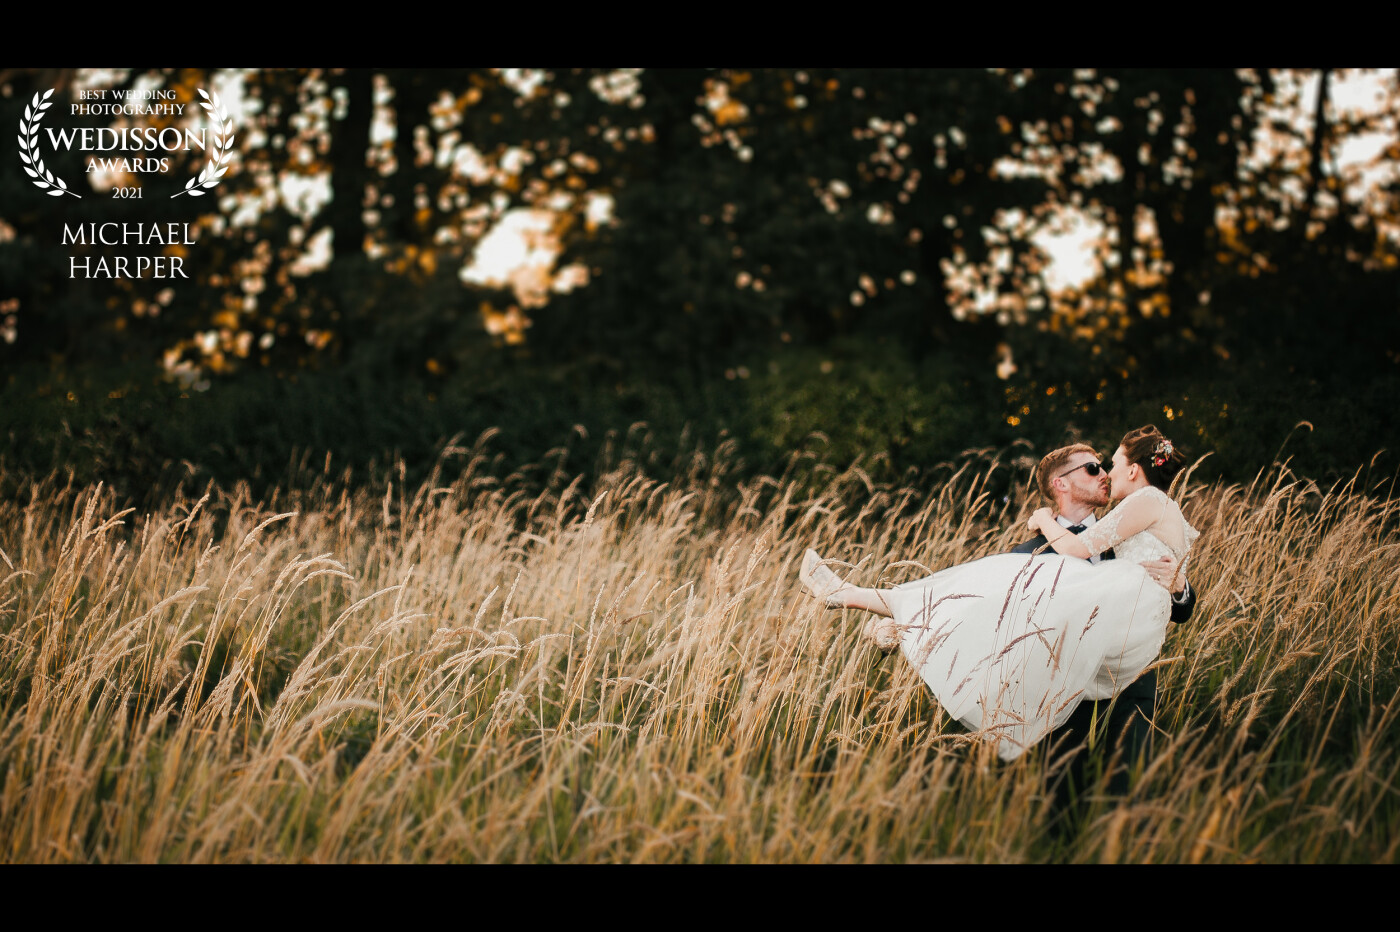 A beautiful moment when the groom picked up the boho bride the long grass and span her round for fun just at sunset. All day this couple had been great fun and were genuinely loving every moment.